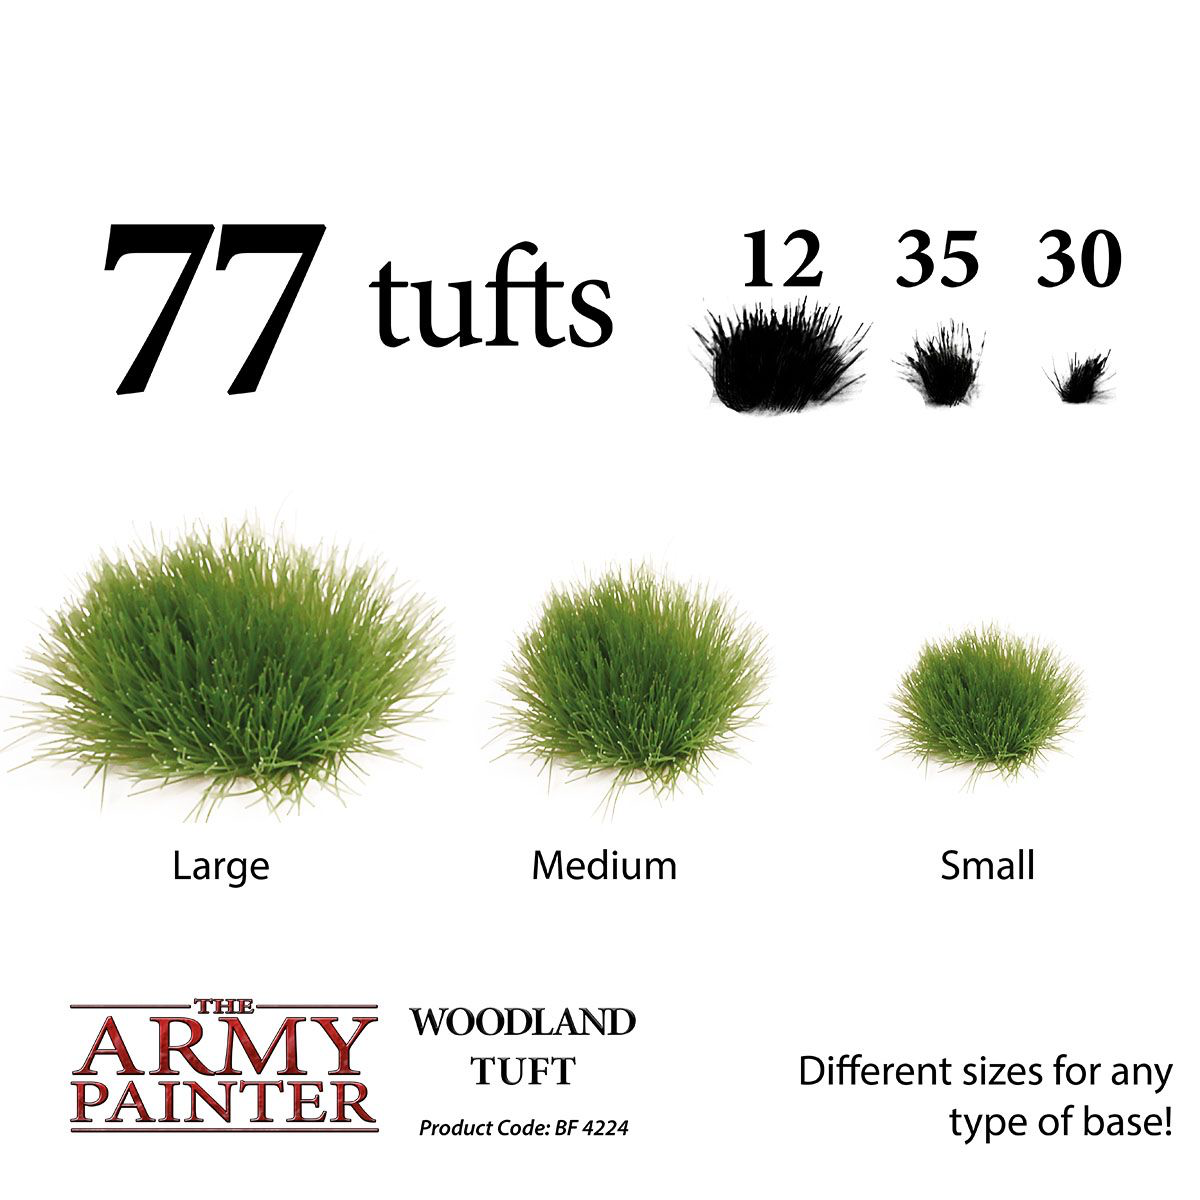 The Army Painter - Woodland Tufts